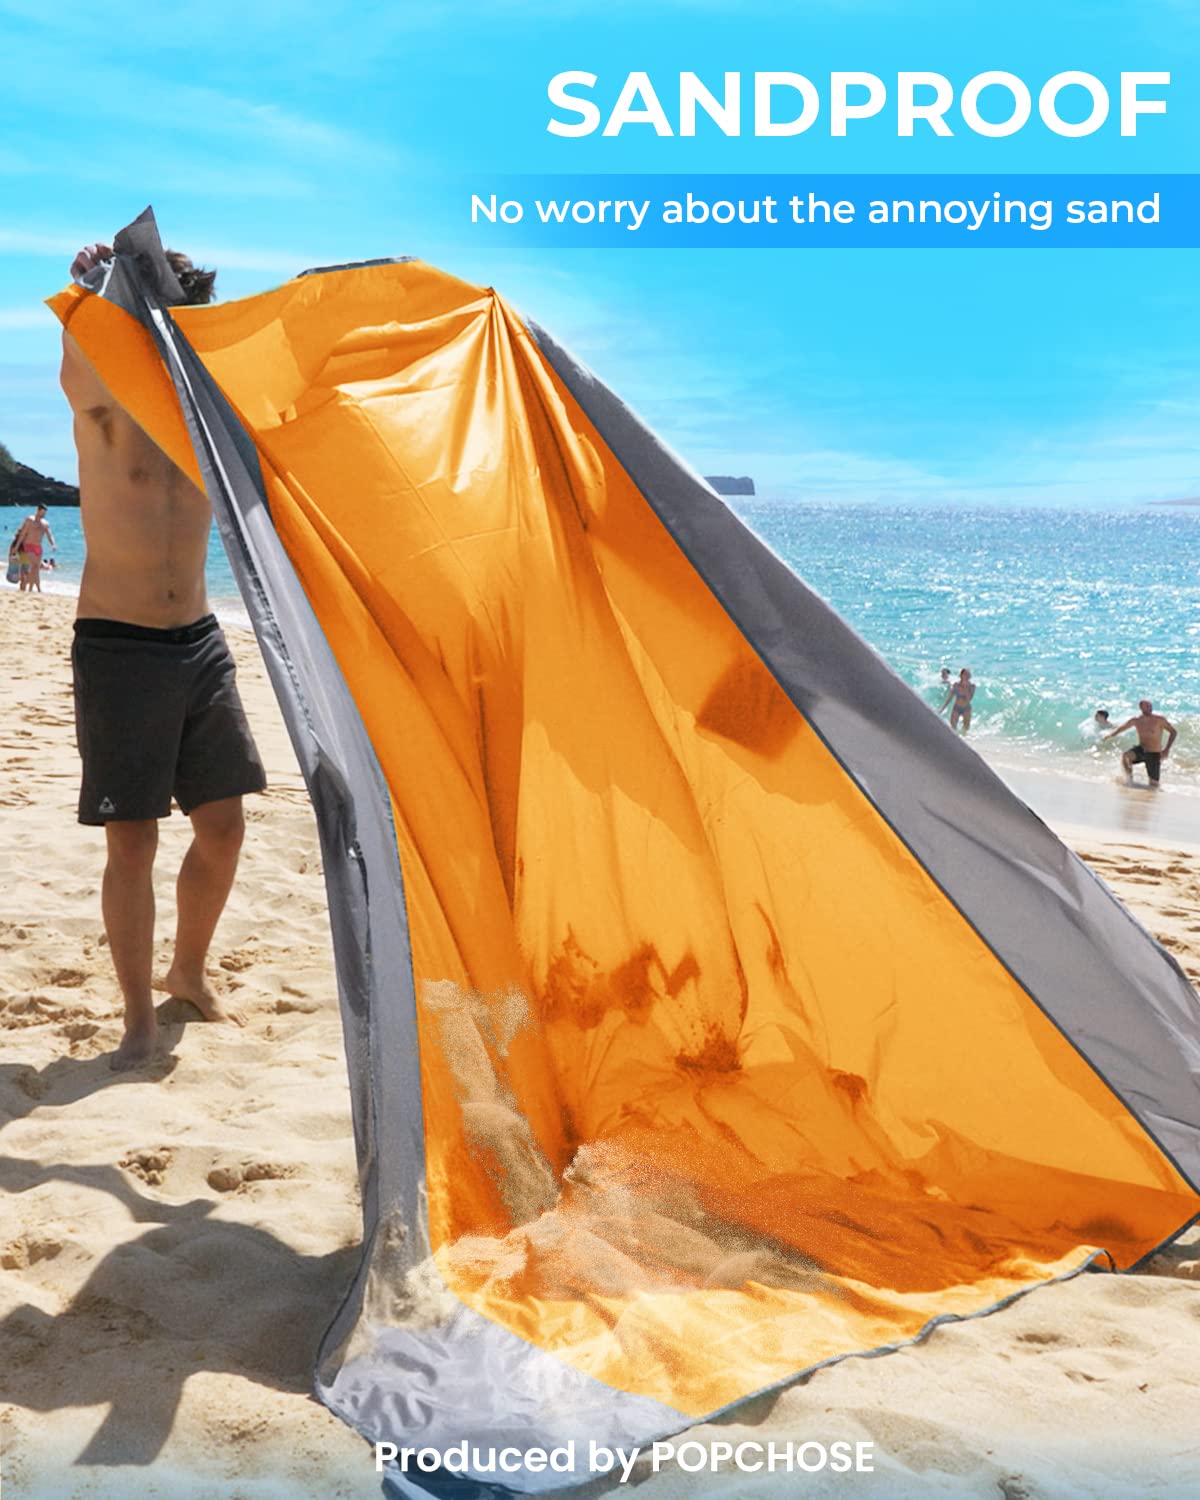 POPCHOSE Sandfree Beach Blanket - Large 83"×78", Waterproof & Sandproof, Ideal for 2 Adults, Lightweight, Easy to Clean, with 6